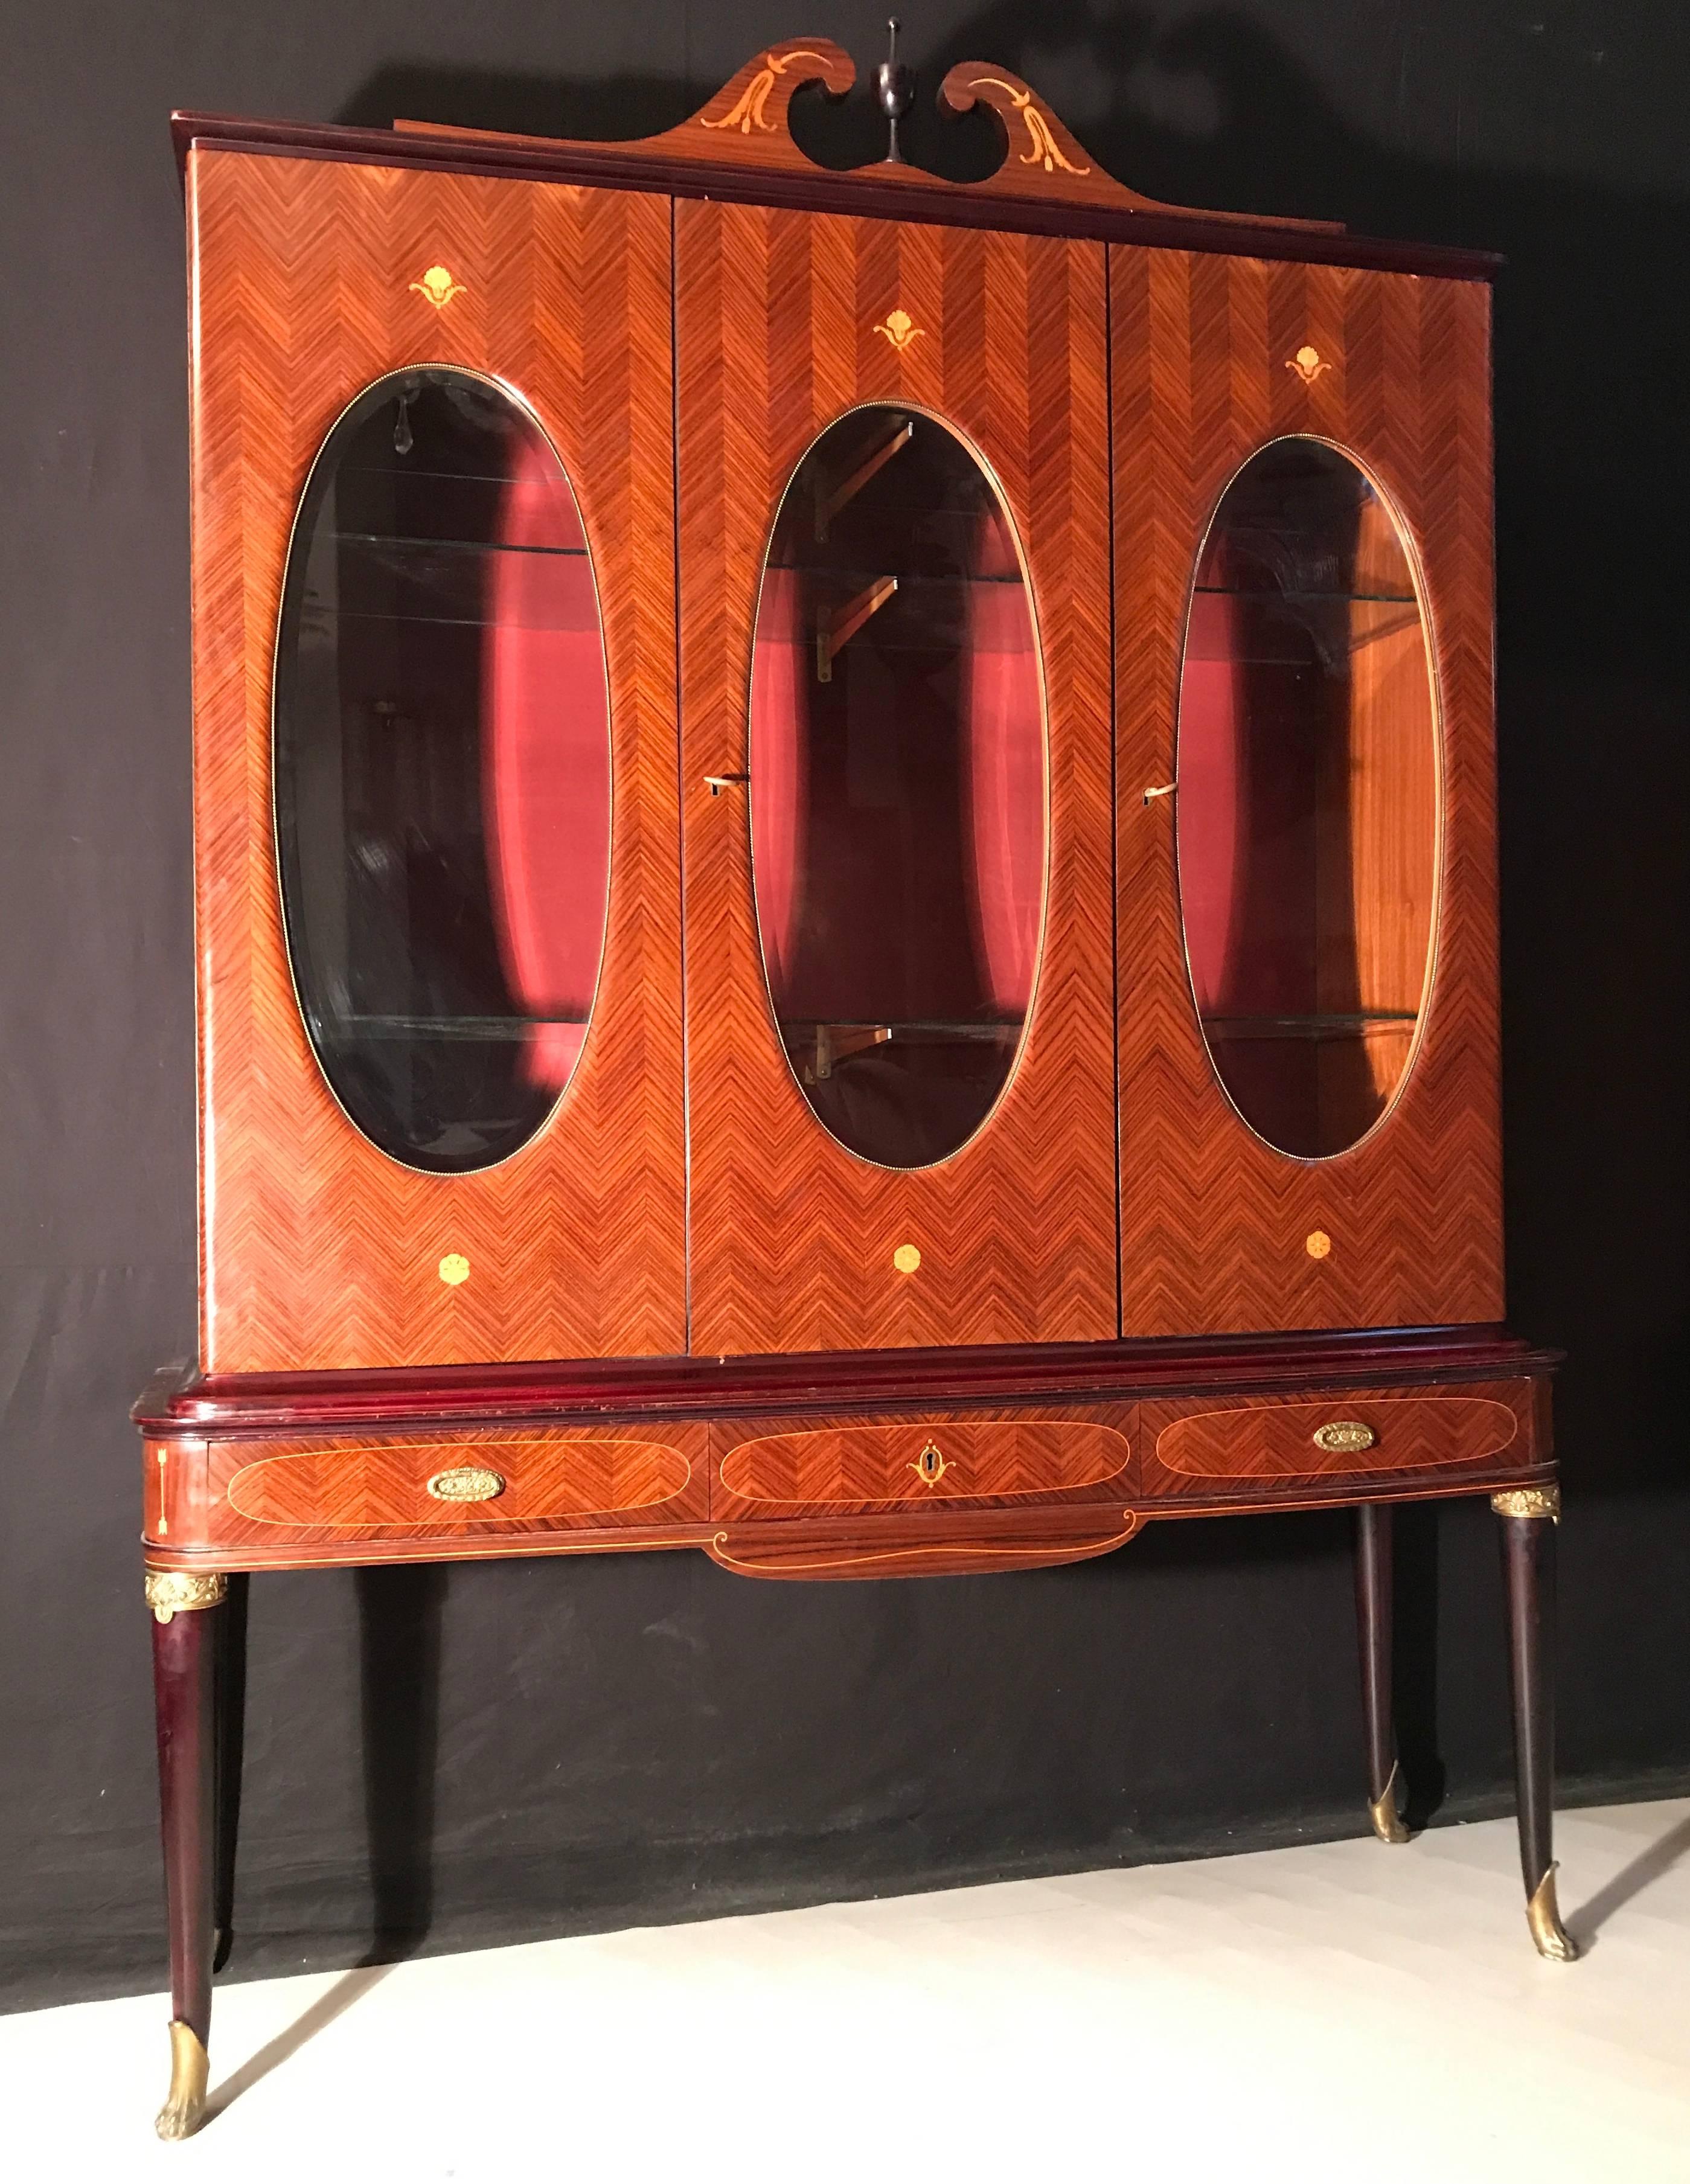 Well designed and finished with valuable materials. Ormolu-mounted, carved and inlaid with rare woods.

Paolo Buffa was named one of the most important designers in Italy. Architect and designer best known for his designs of midcentury Furniture.